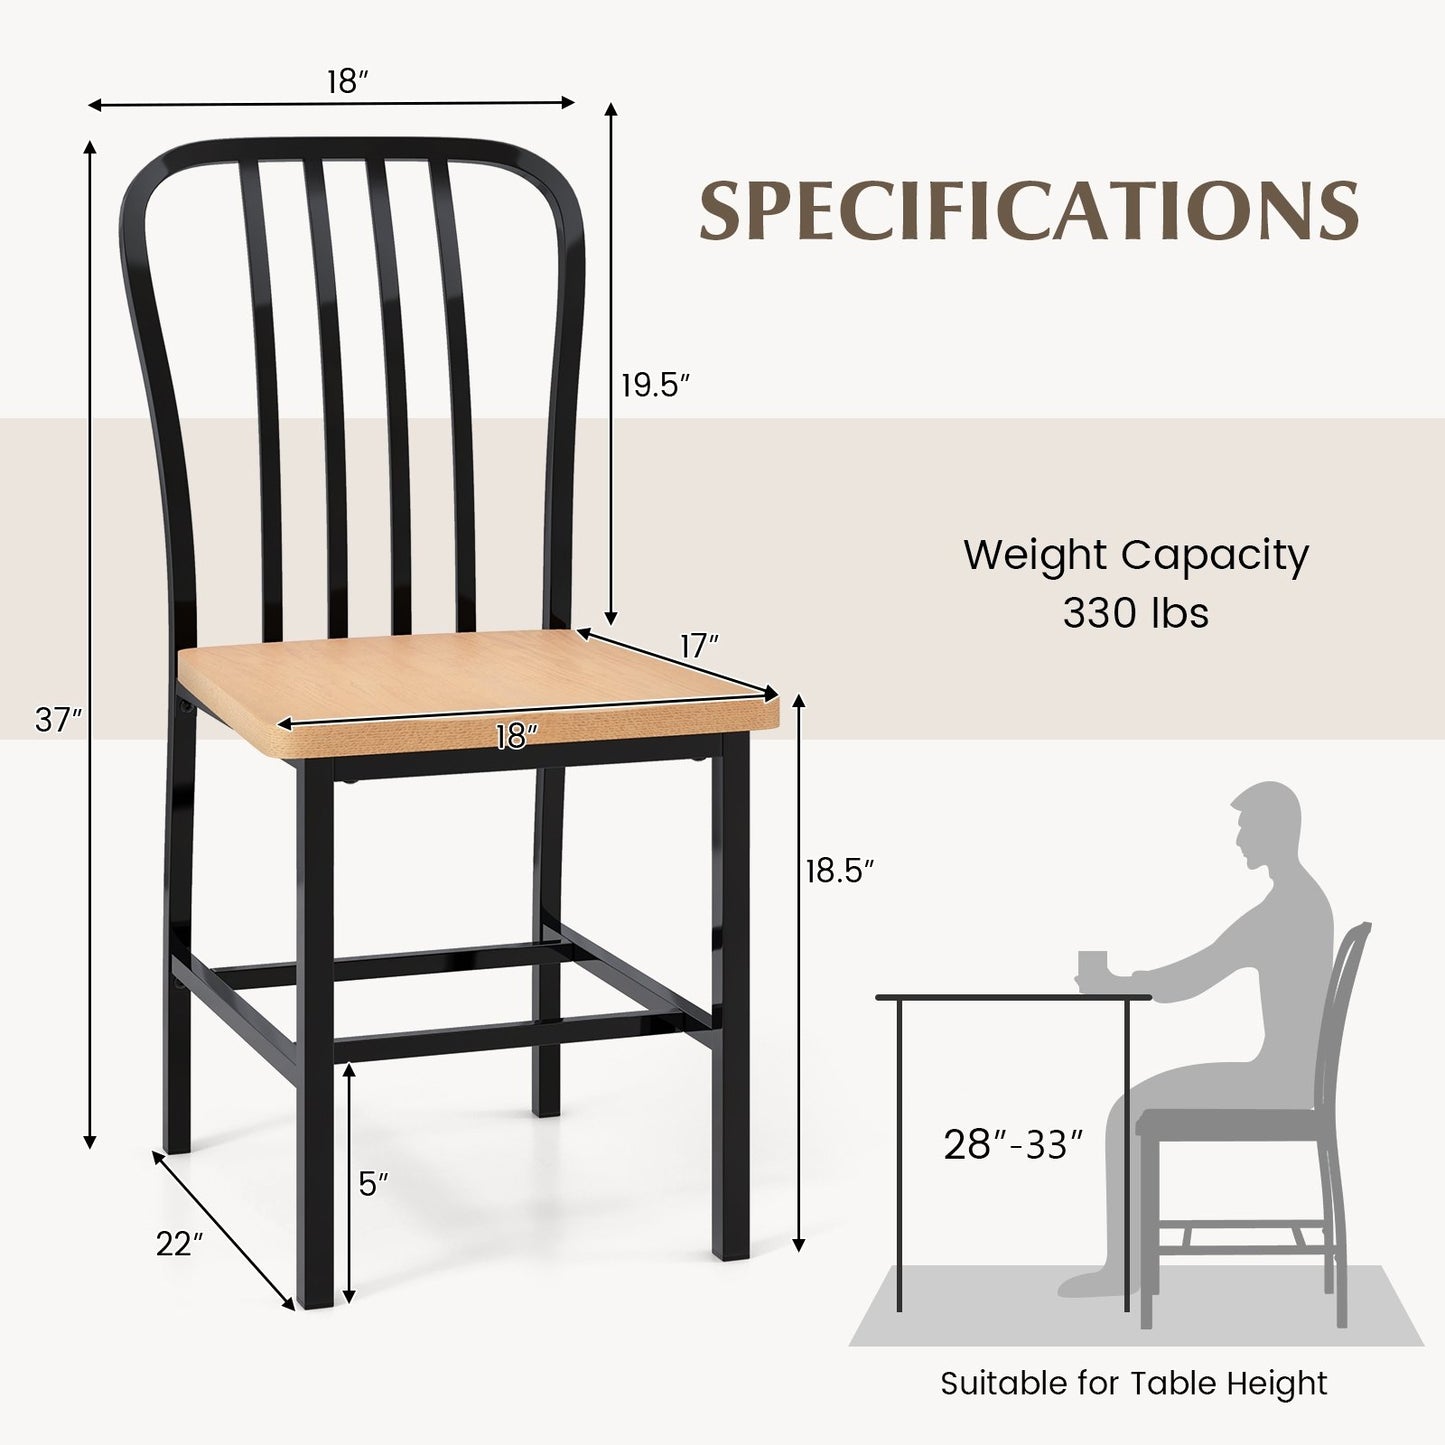 Armless Spindle Back Dining Chair Set of 2 with Ergonomic Seat, Black